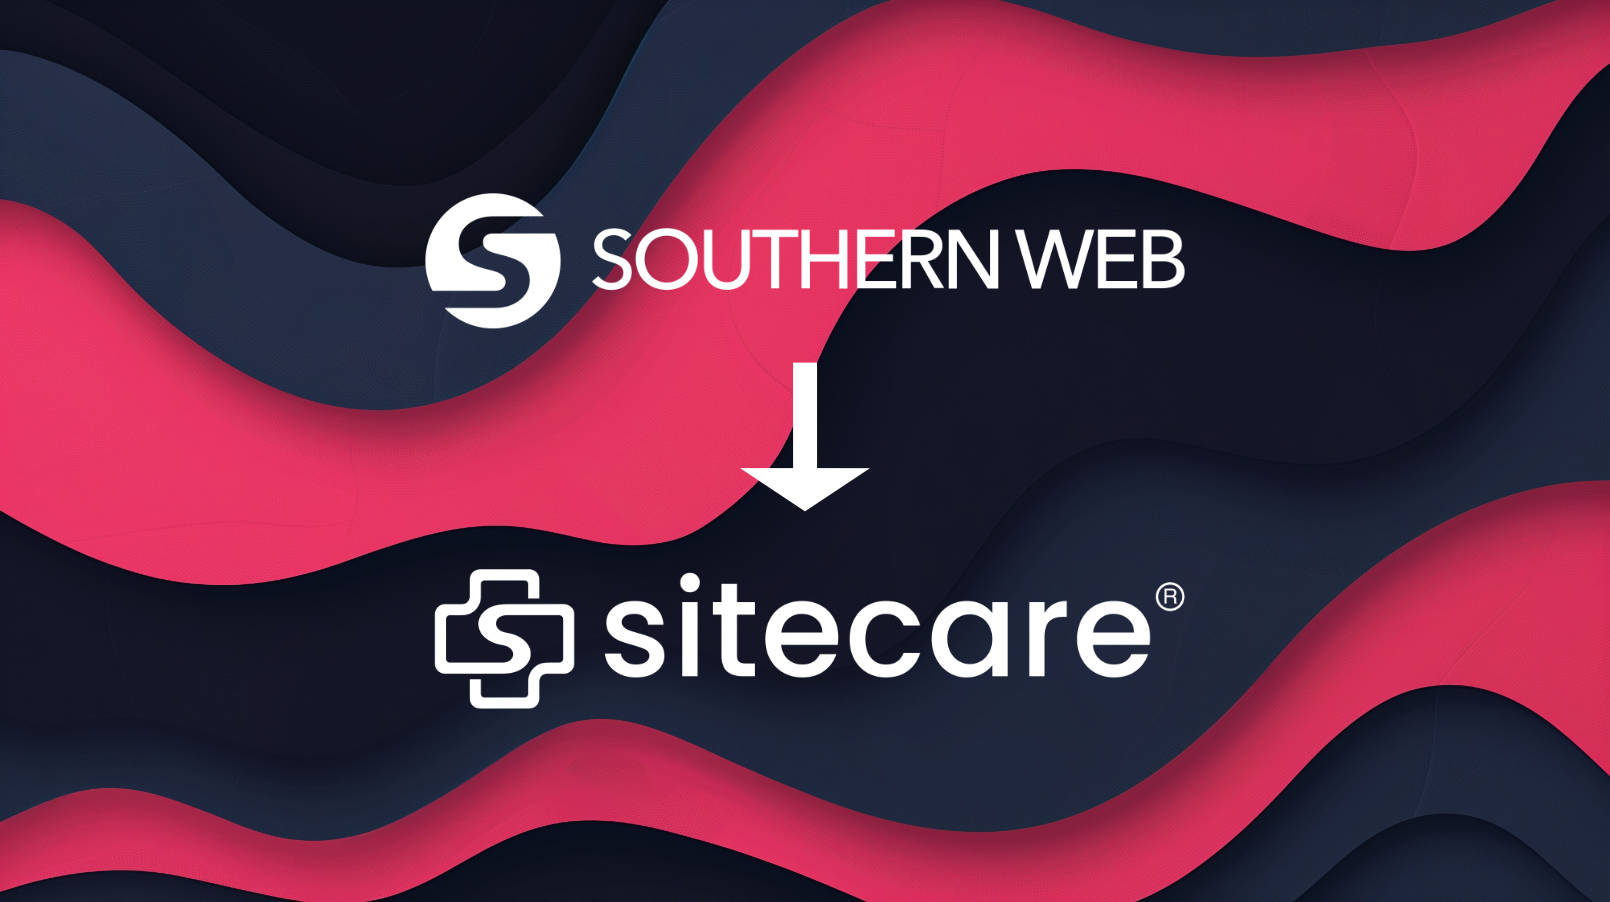 Southern Web Announces Rebrand, Changes Name to SiteCare